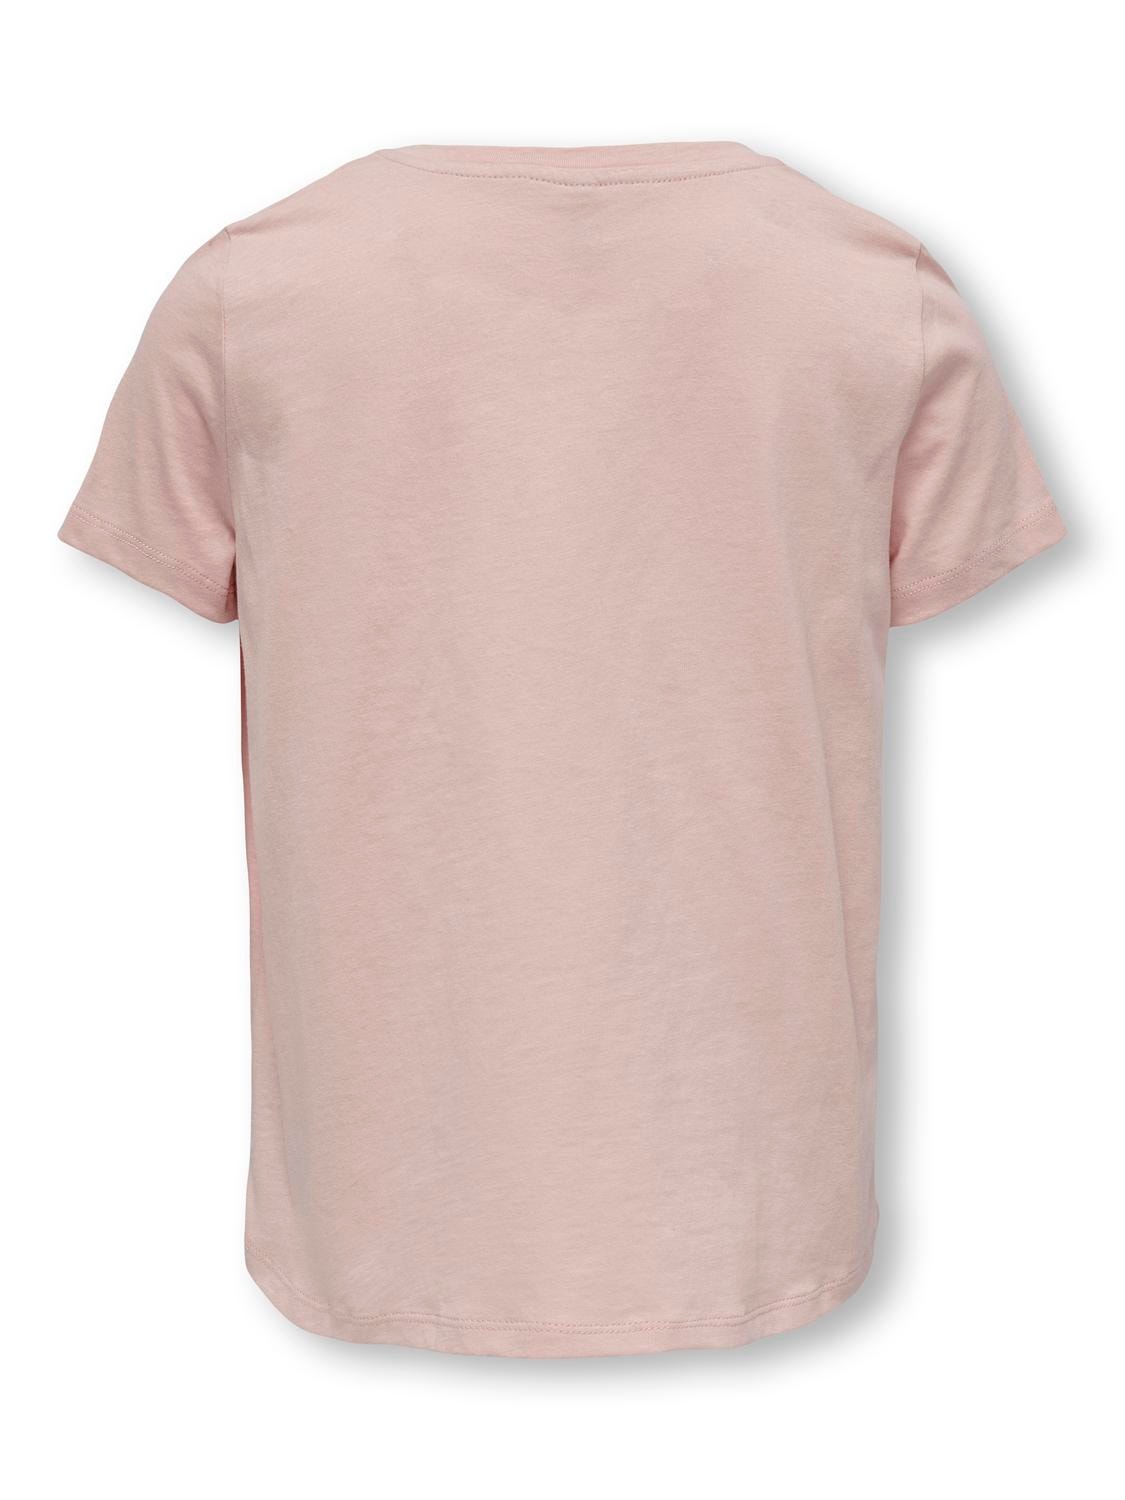 ONLY Volume Fit Round Neck T-Shirt -Rose Smoke - 15285374